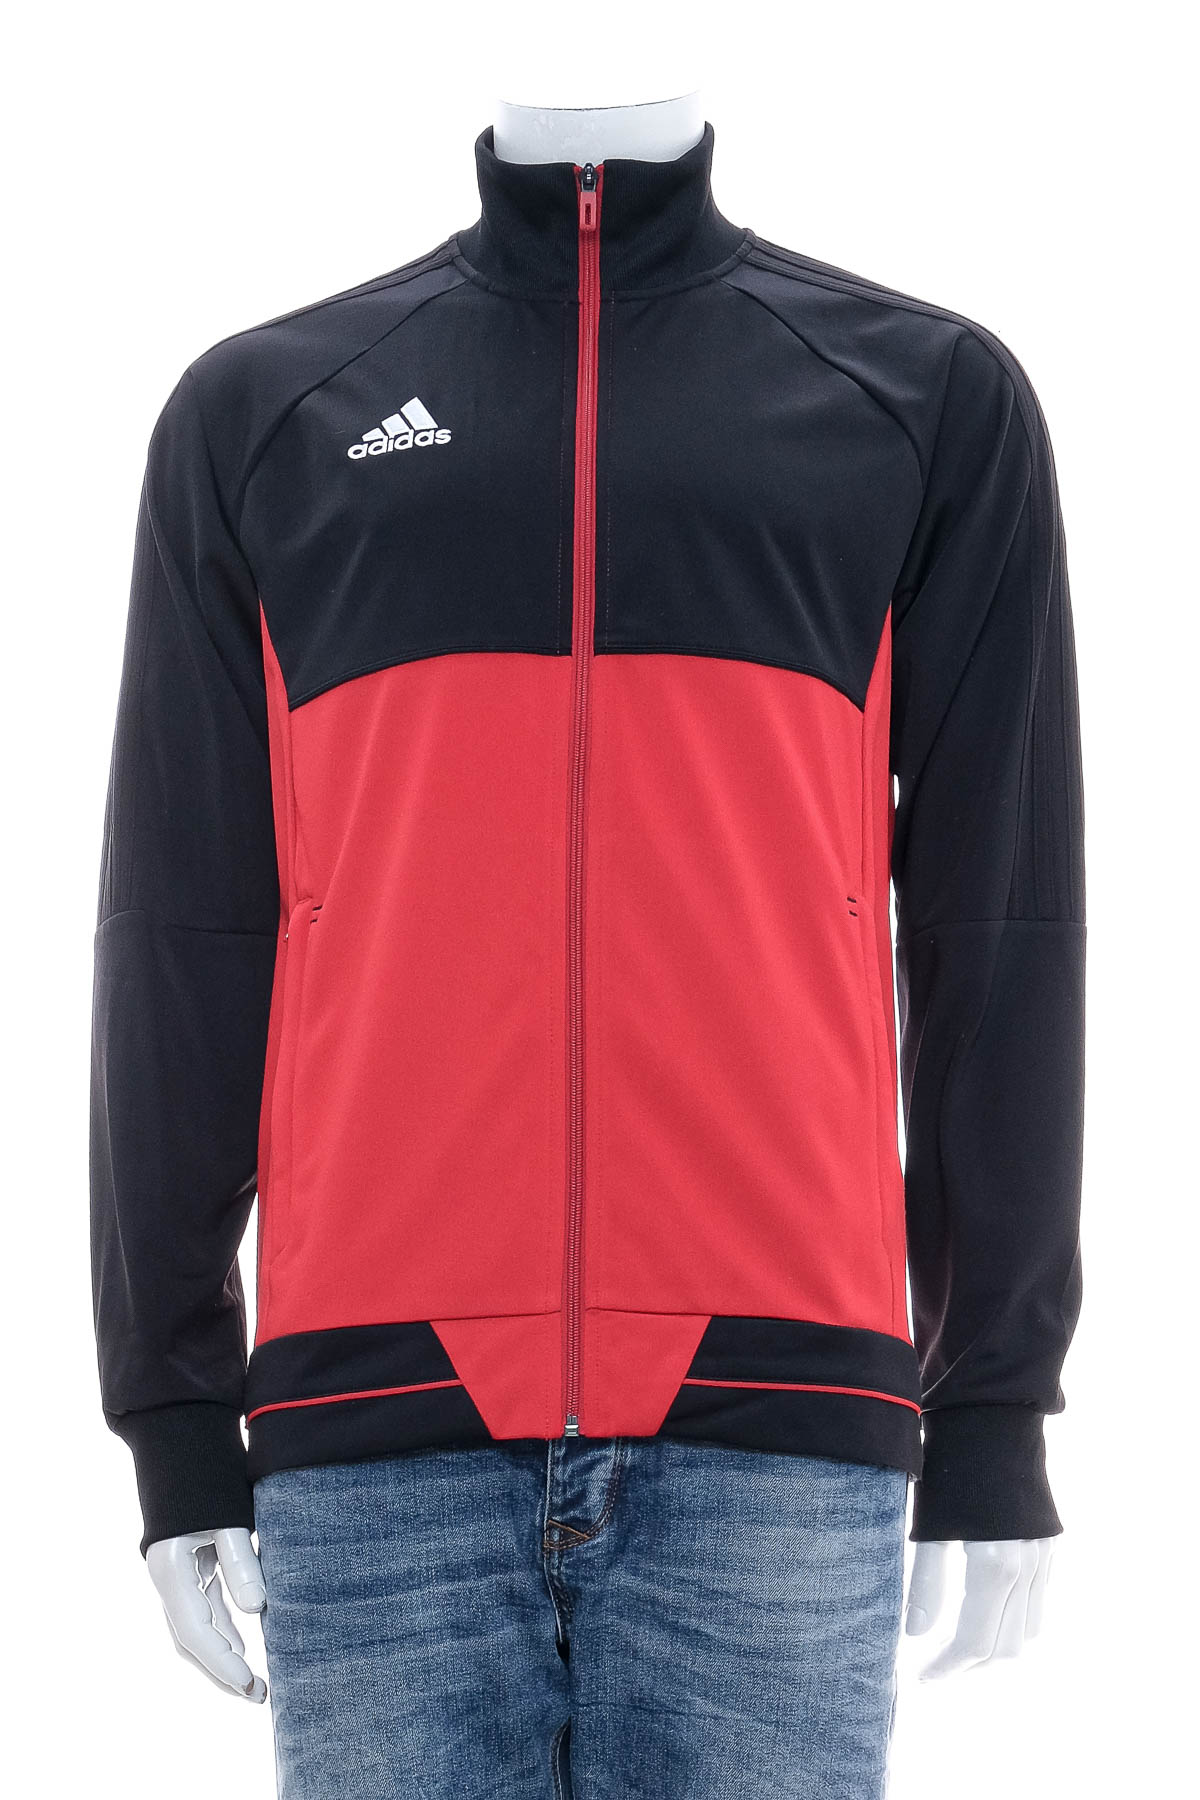 Male sports top - Adidas - 0